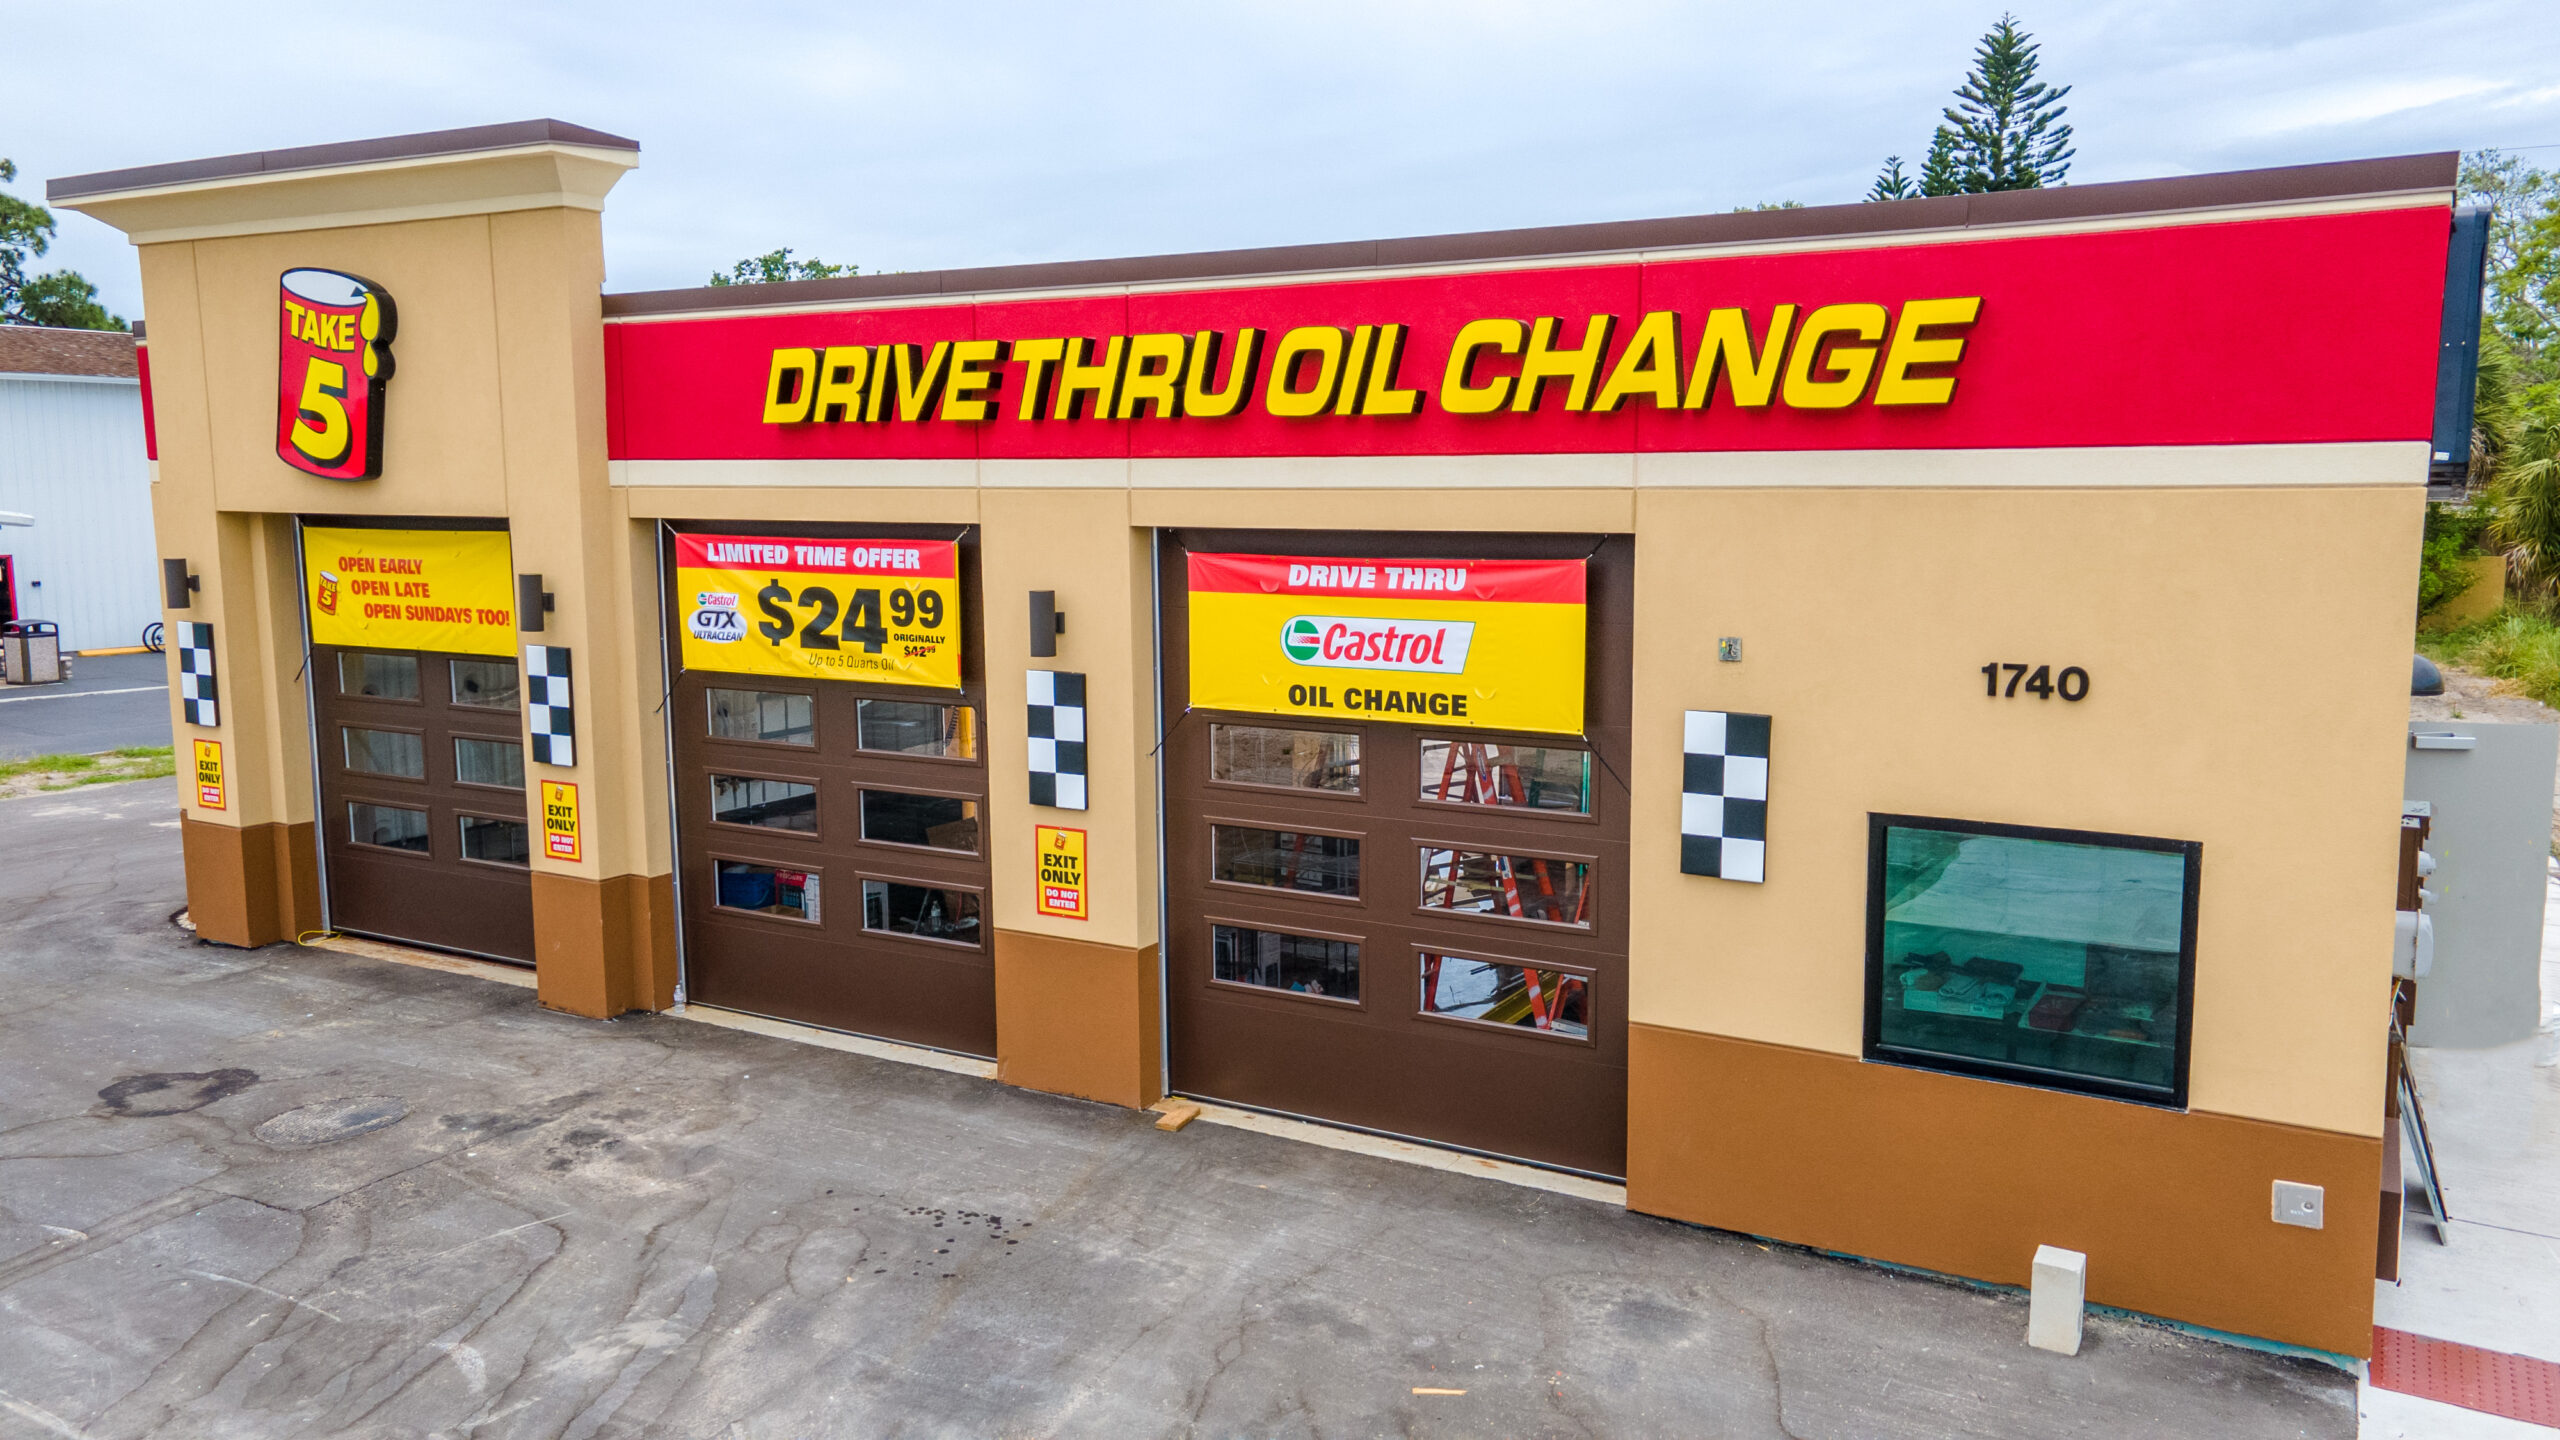 take five oil change 50 off coupon